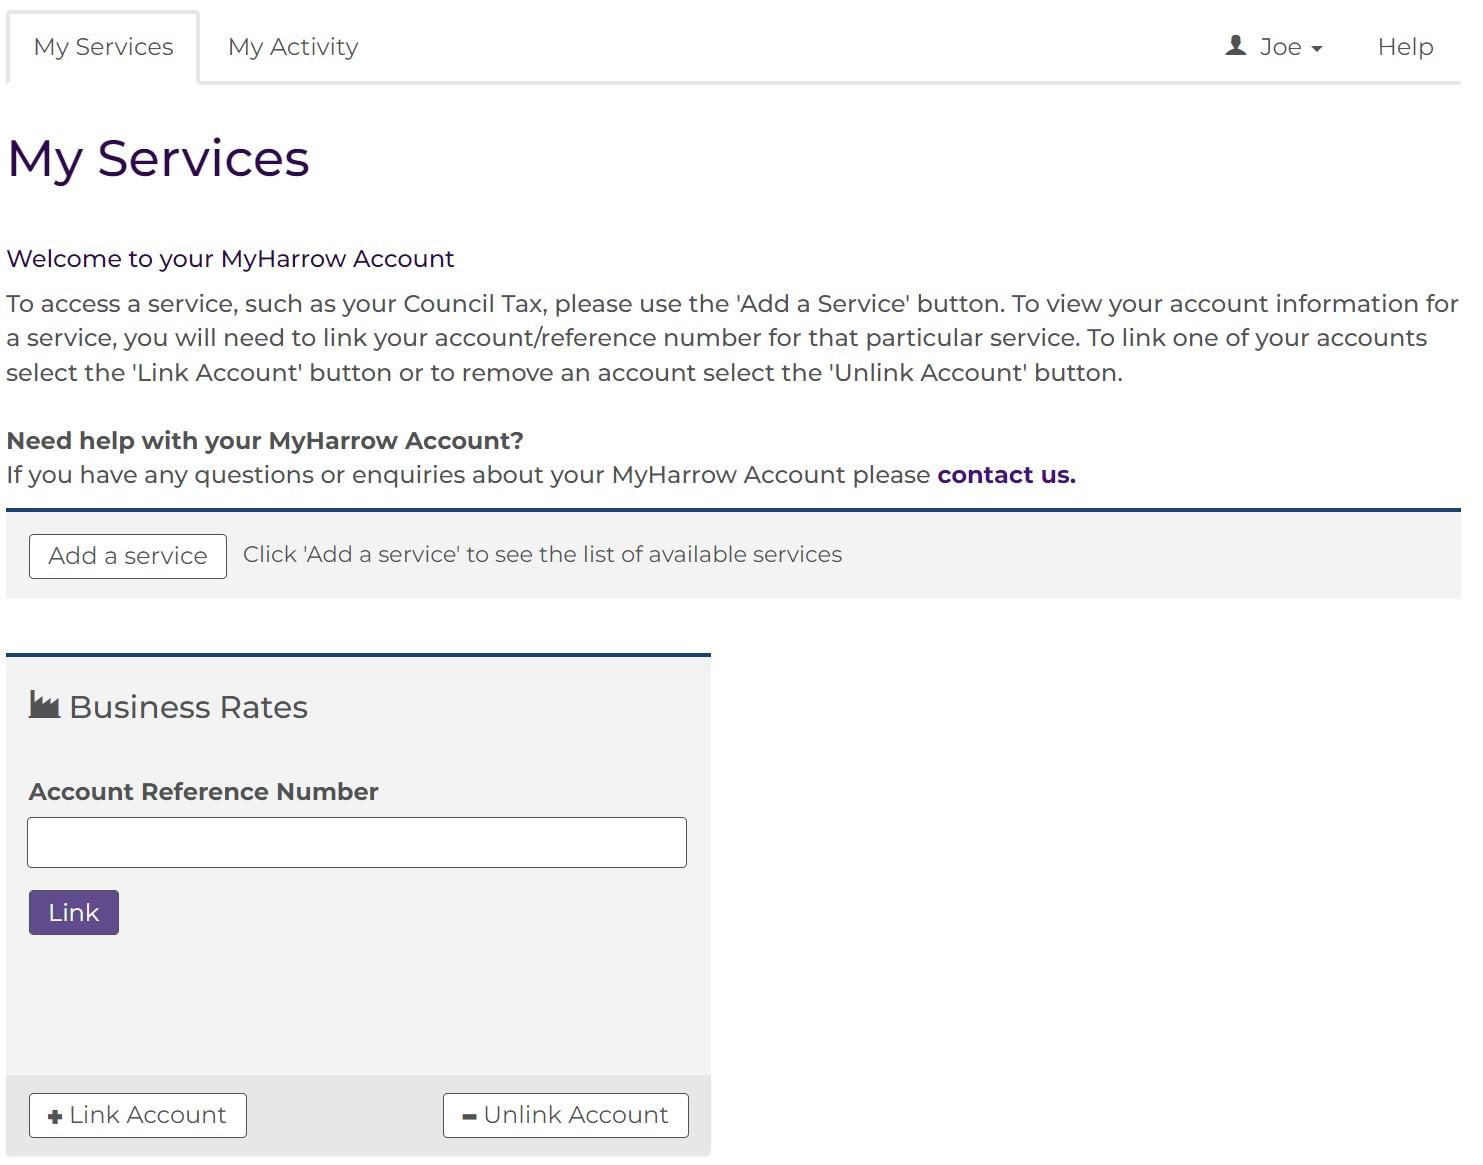 Screenshot of the MyServices Screen you will see when you first log in to your account